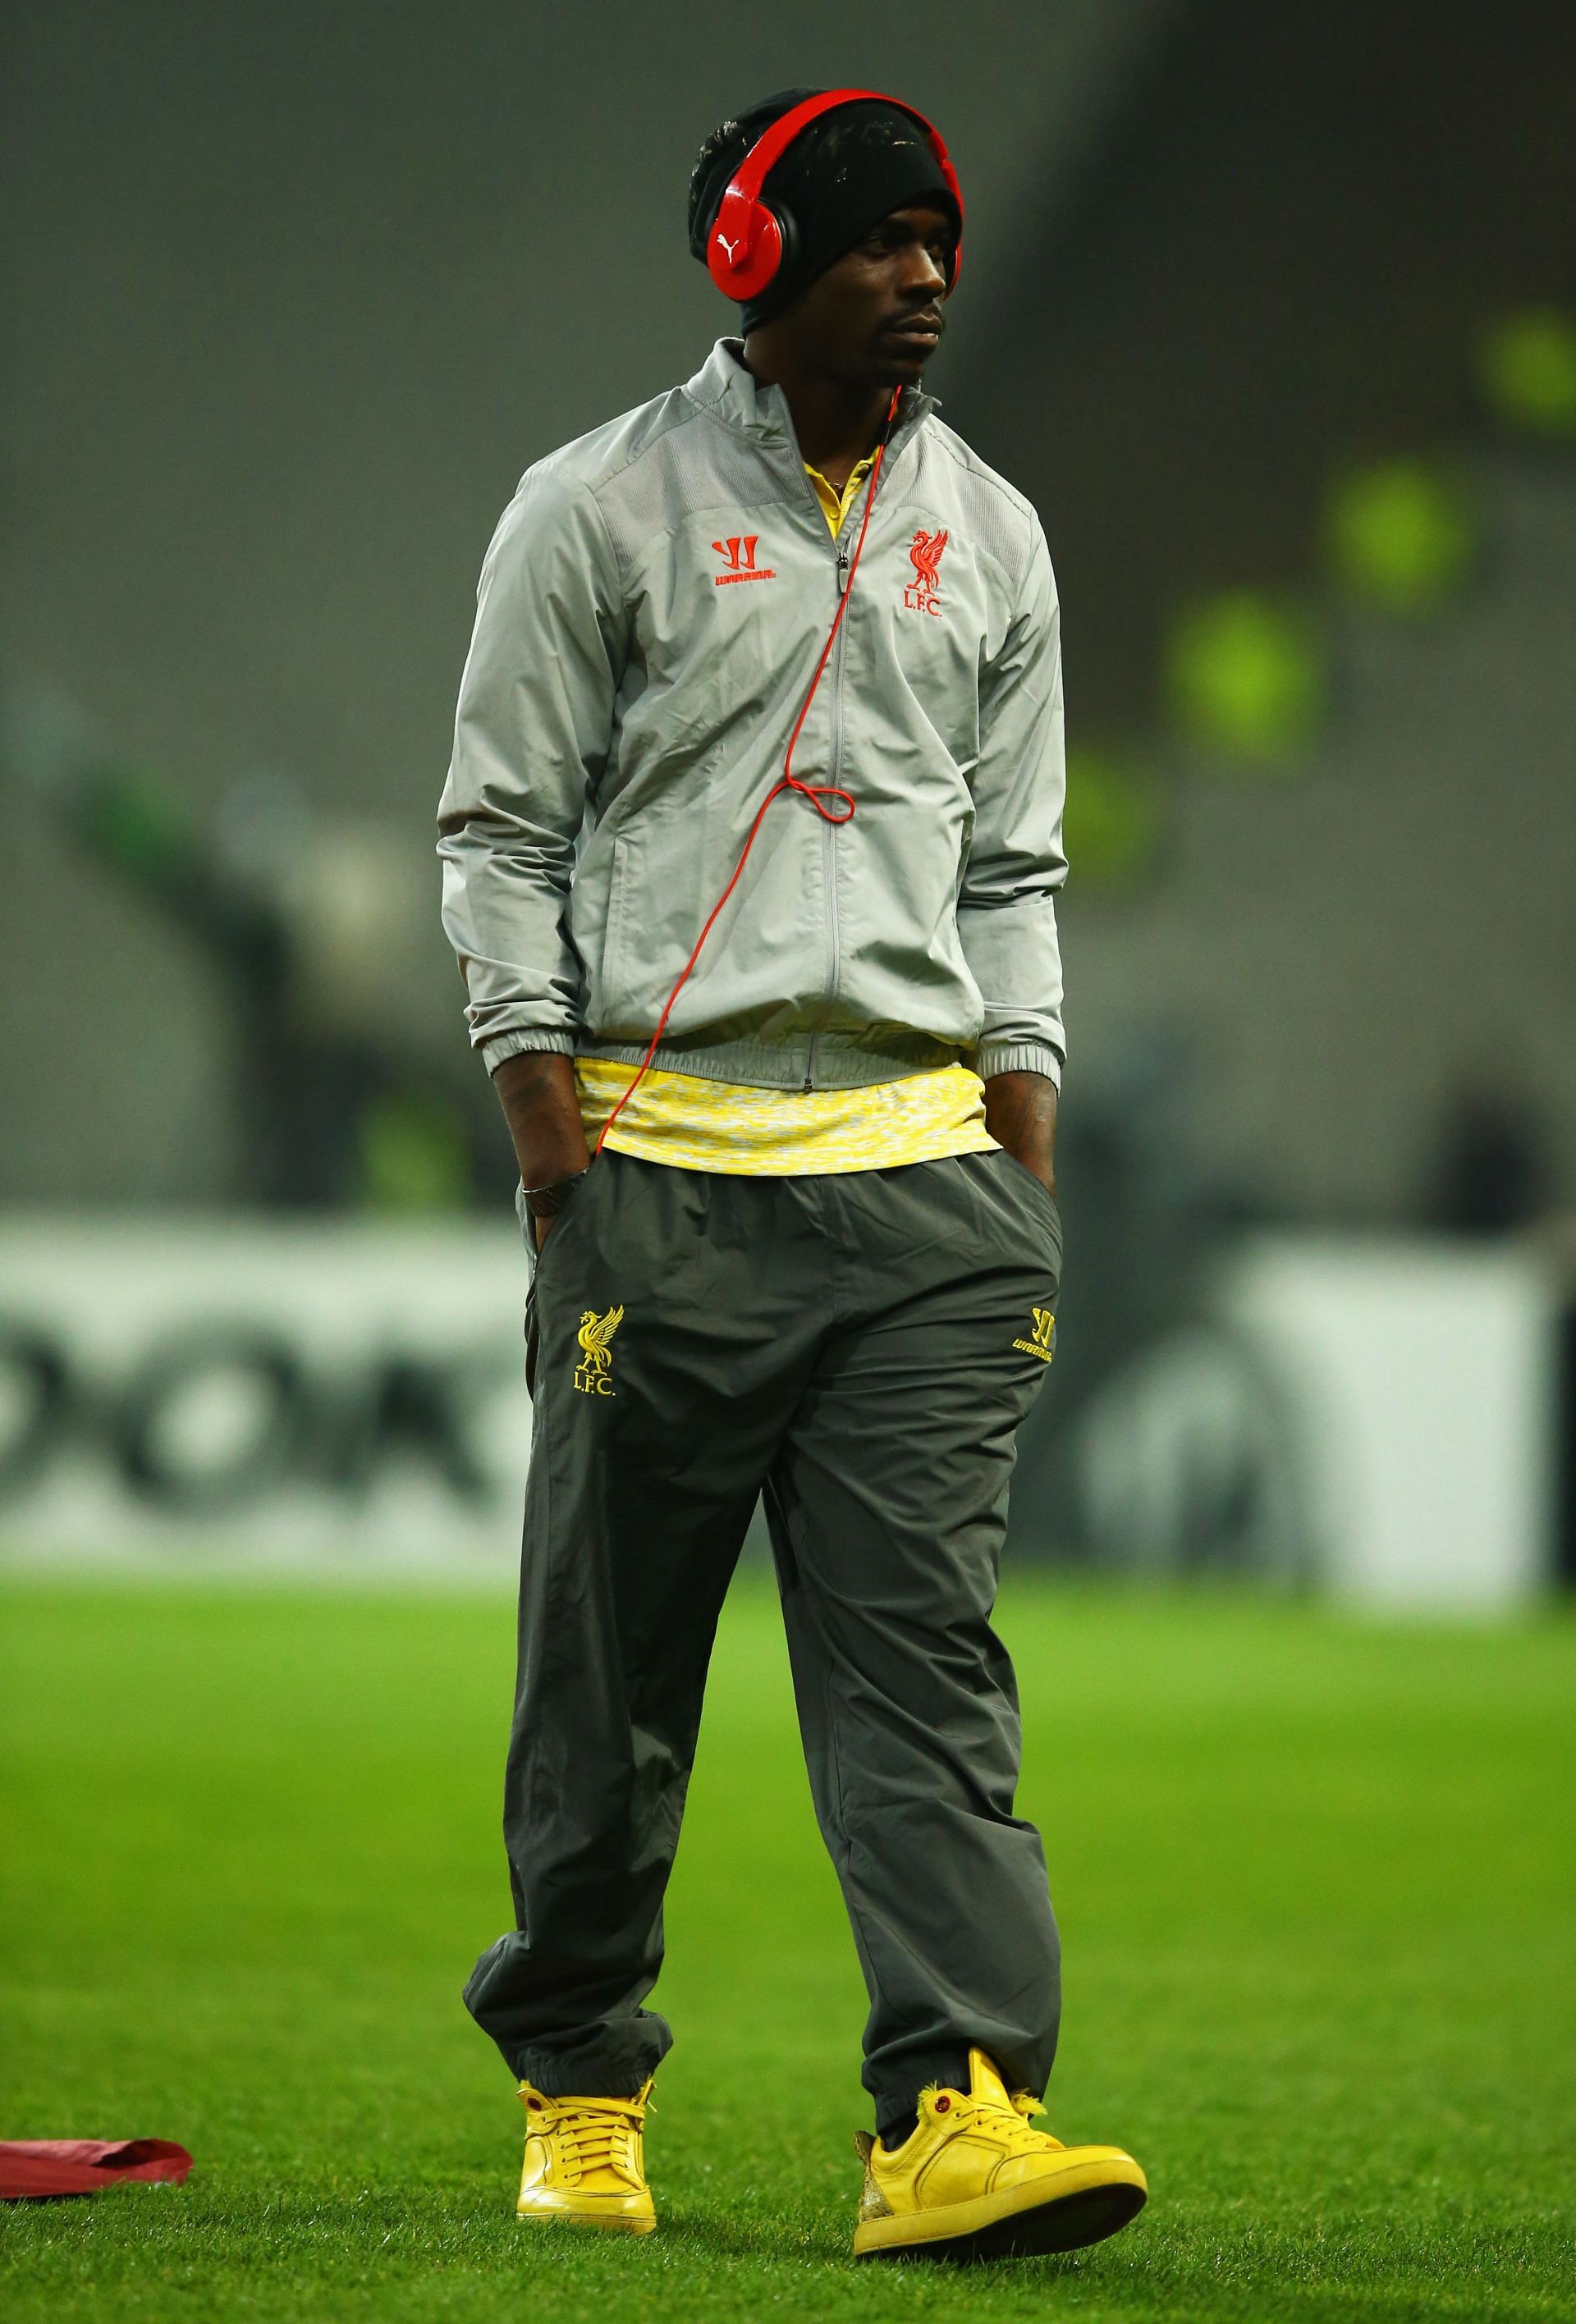 Mario Balotelli of Liverpool walks on the pitch before the UEFA Europa League Round of 32-second leg match between Besiktas JK and Liverpool FC on February 26, 2015, in Istanbul.